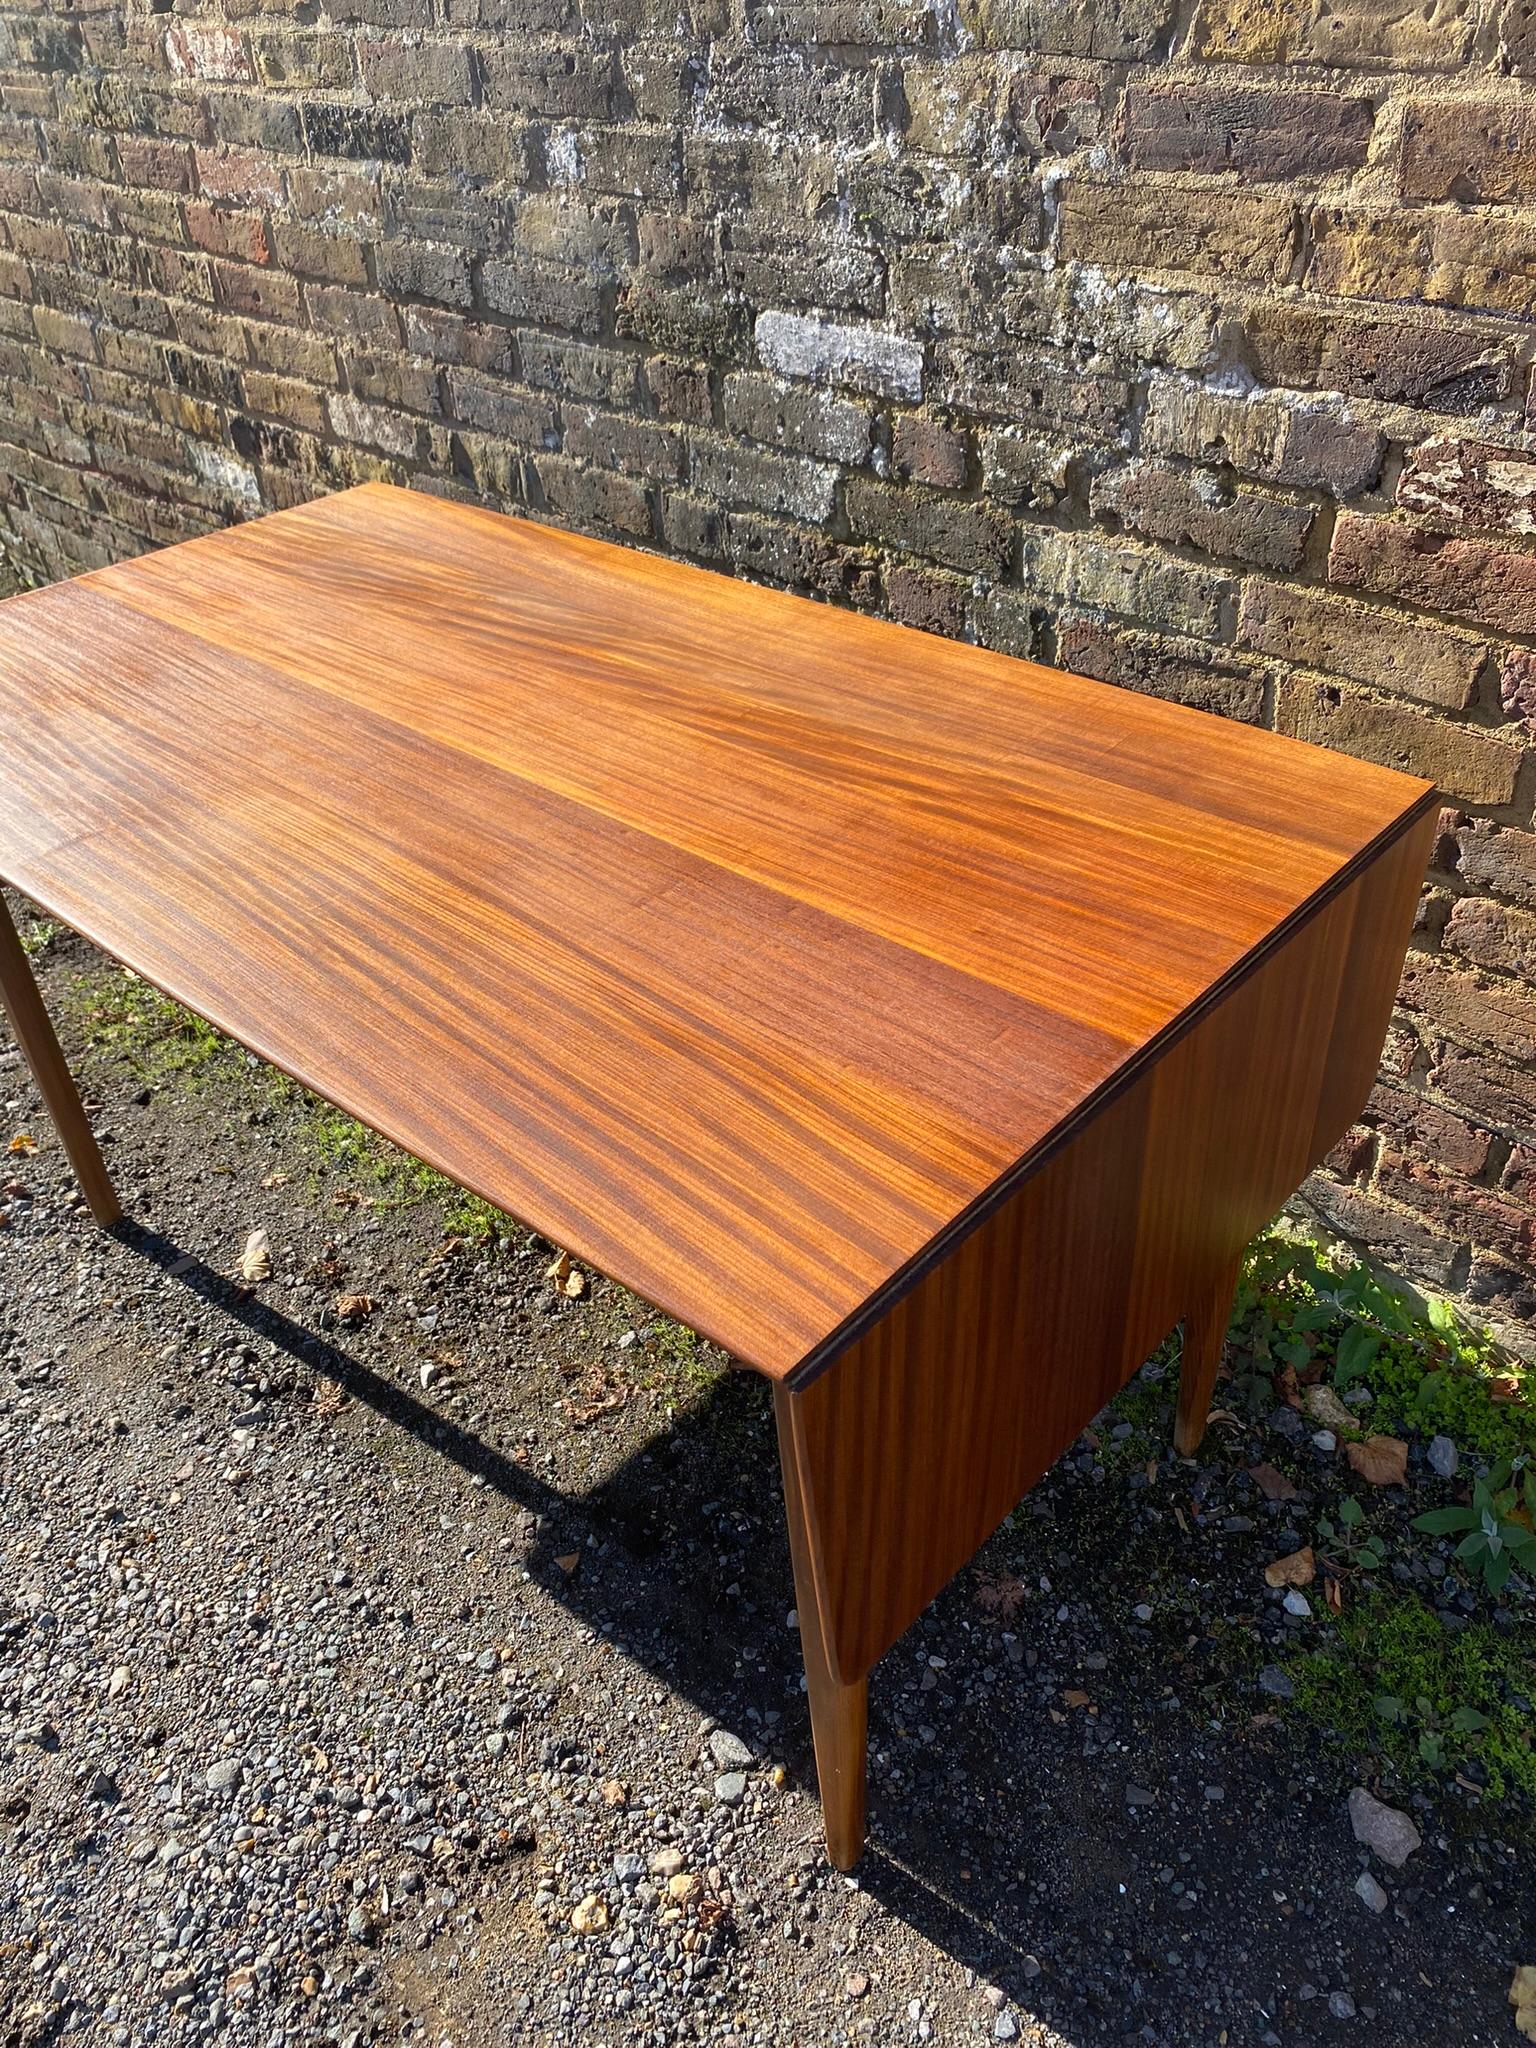 Mid-Century Afromosia Teak Drop-Leaf Dining Table, Denmark, 1960s

The mid-century afromosia teak drop-leaf dining table from Denmark in the 1960s is a striking representation of the elegant and functional design characteristic of the era. Crafted